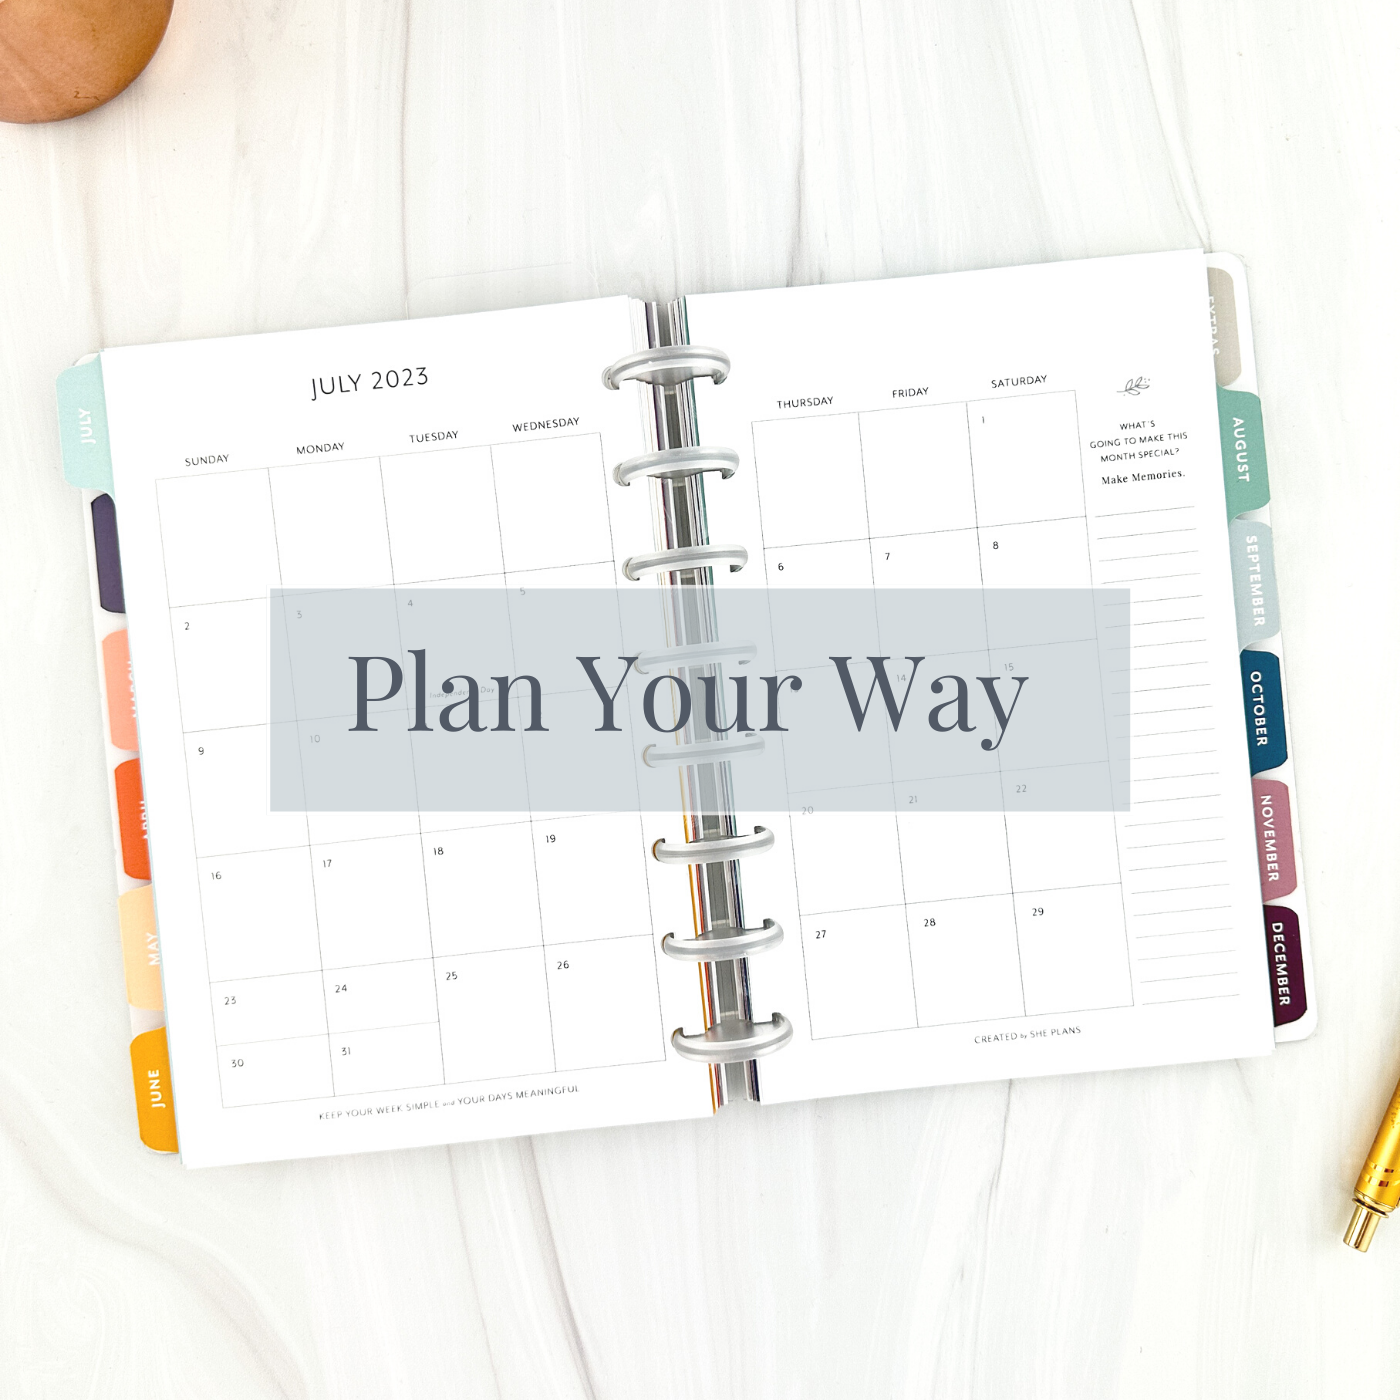 Plan Your Way